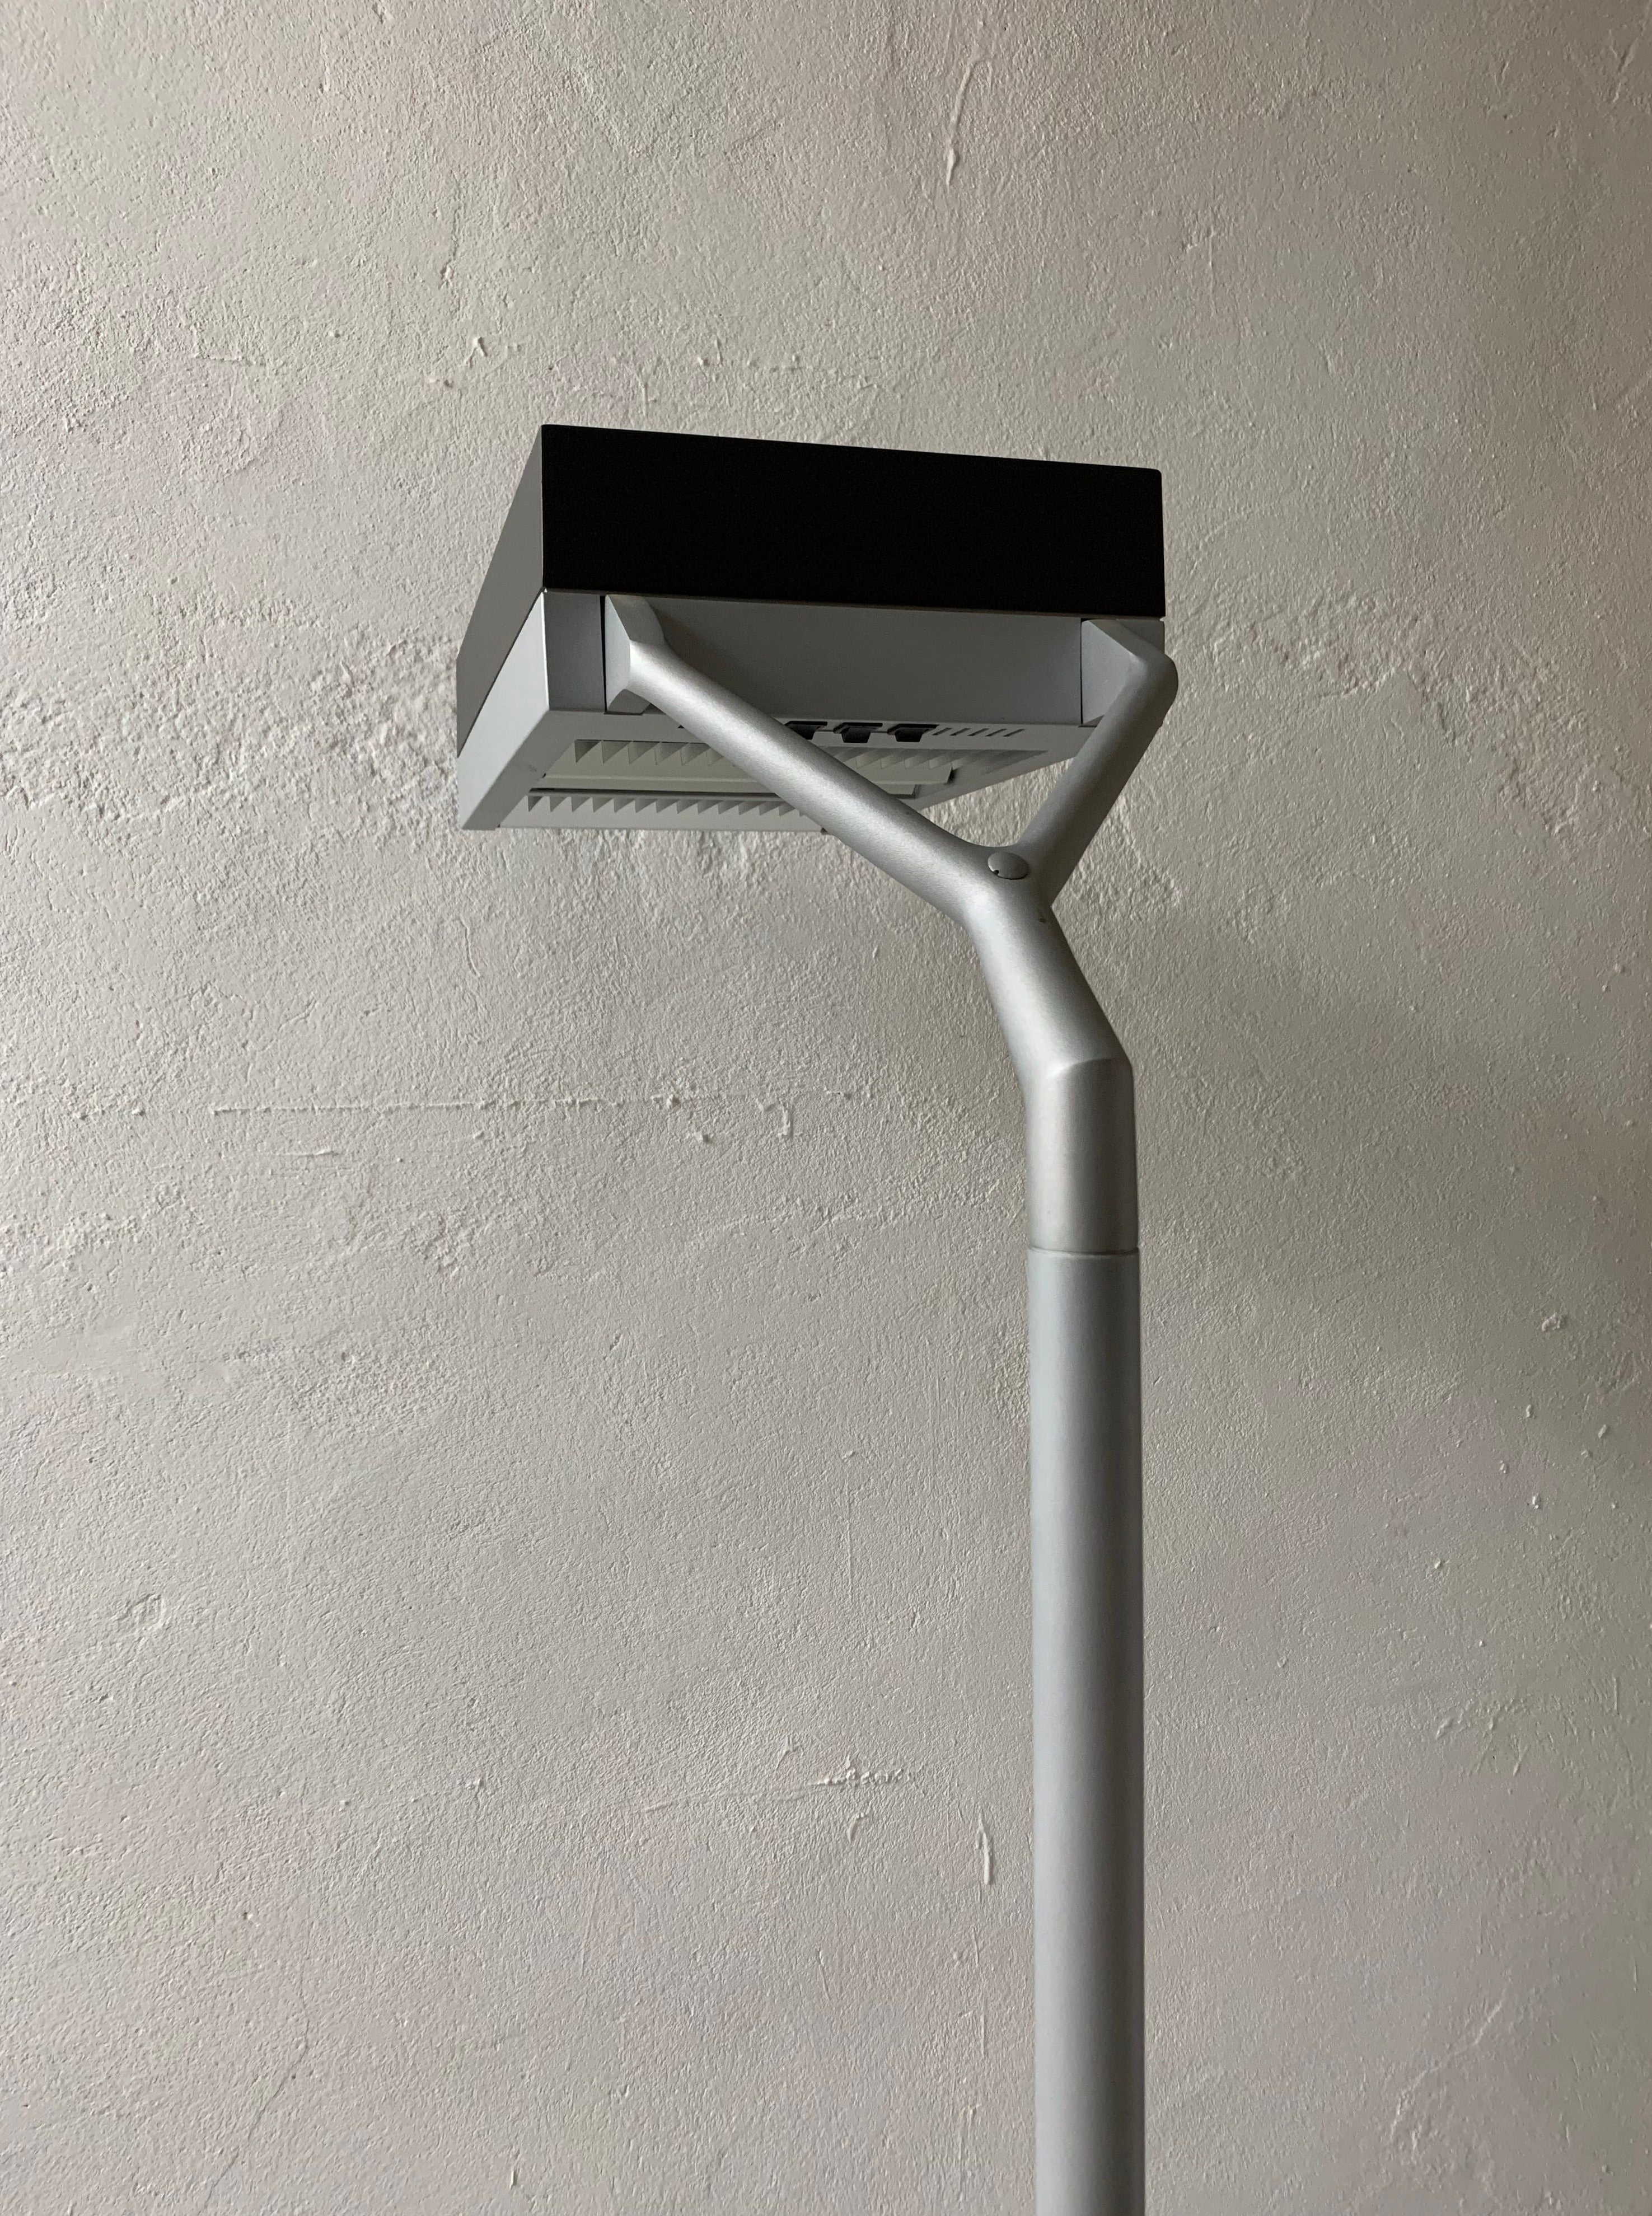 A sleek, modern Veter Vintage LED street lamp with a curved pole and a vintage industrial rectangular lamp head, mounted against a textured gray wall.